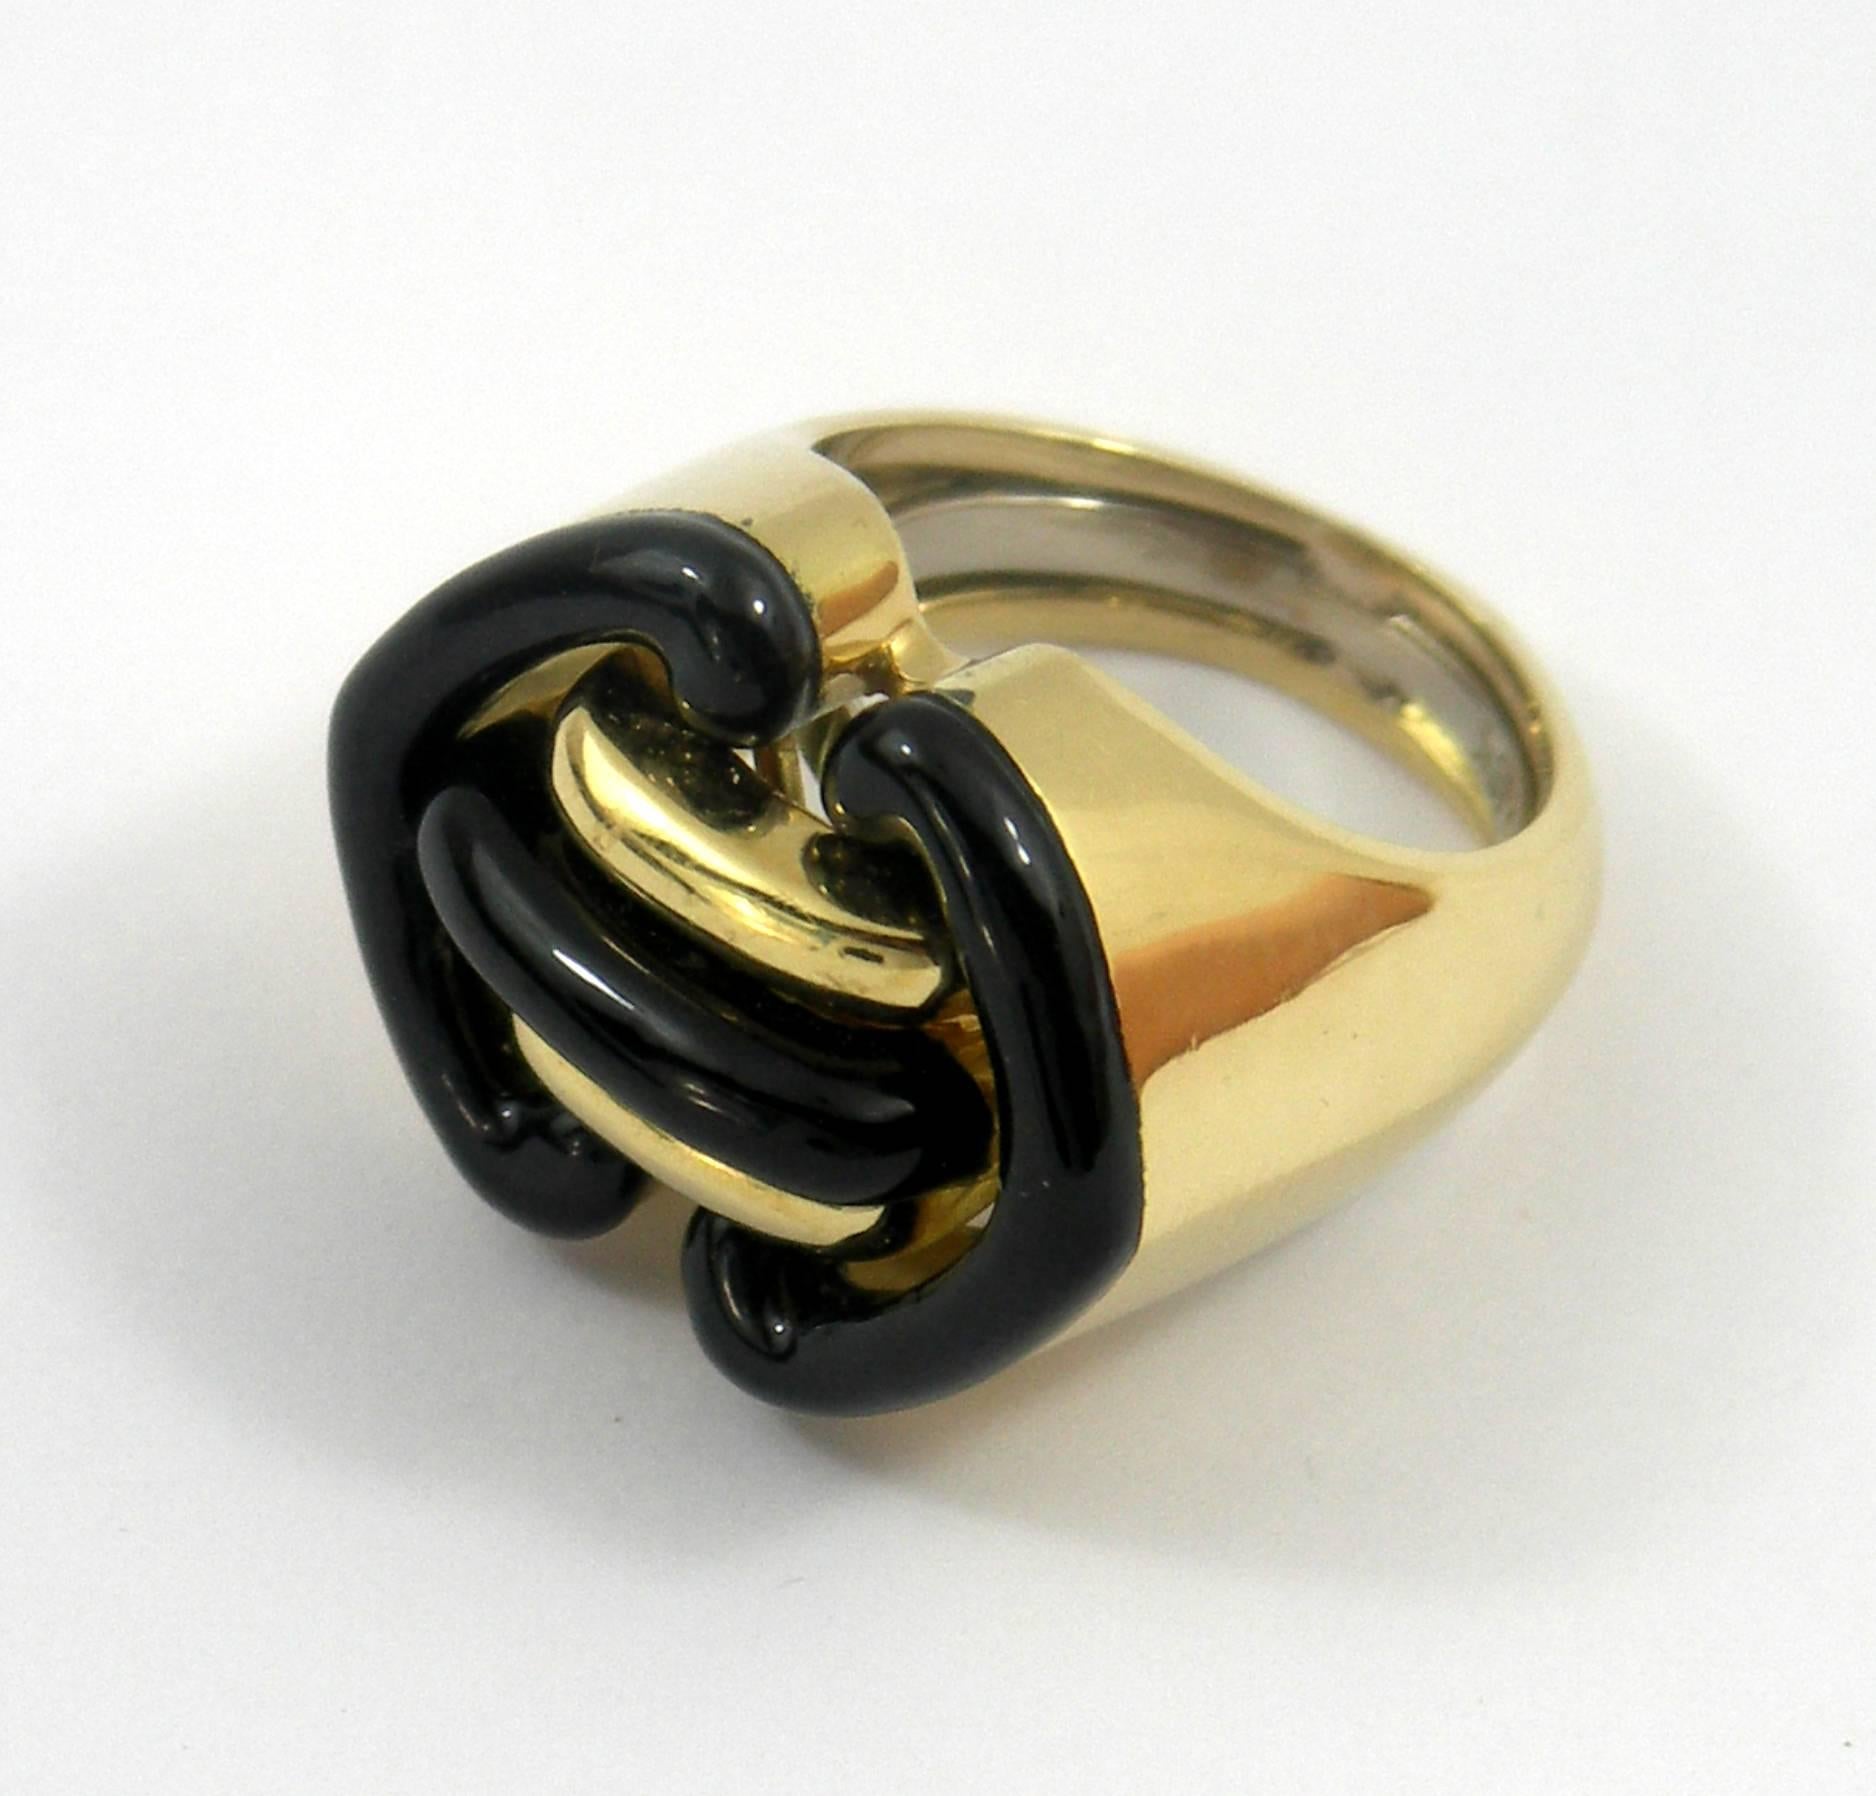 A geometric design 18K yellow gold ring by Andrew Clunn. Measuring 7/8 of an inch wide, and 5/8 of an inch long, it has a tailored look, accented by black enamel. Size 5 1/2.